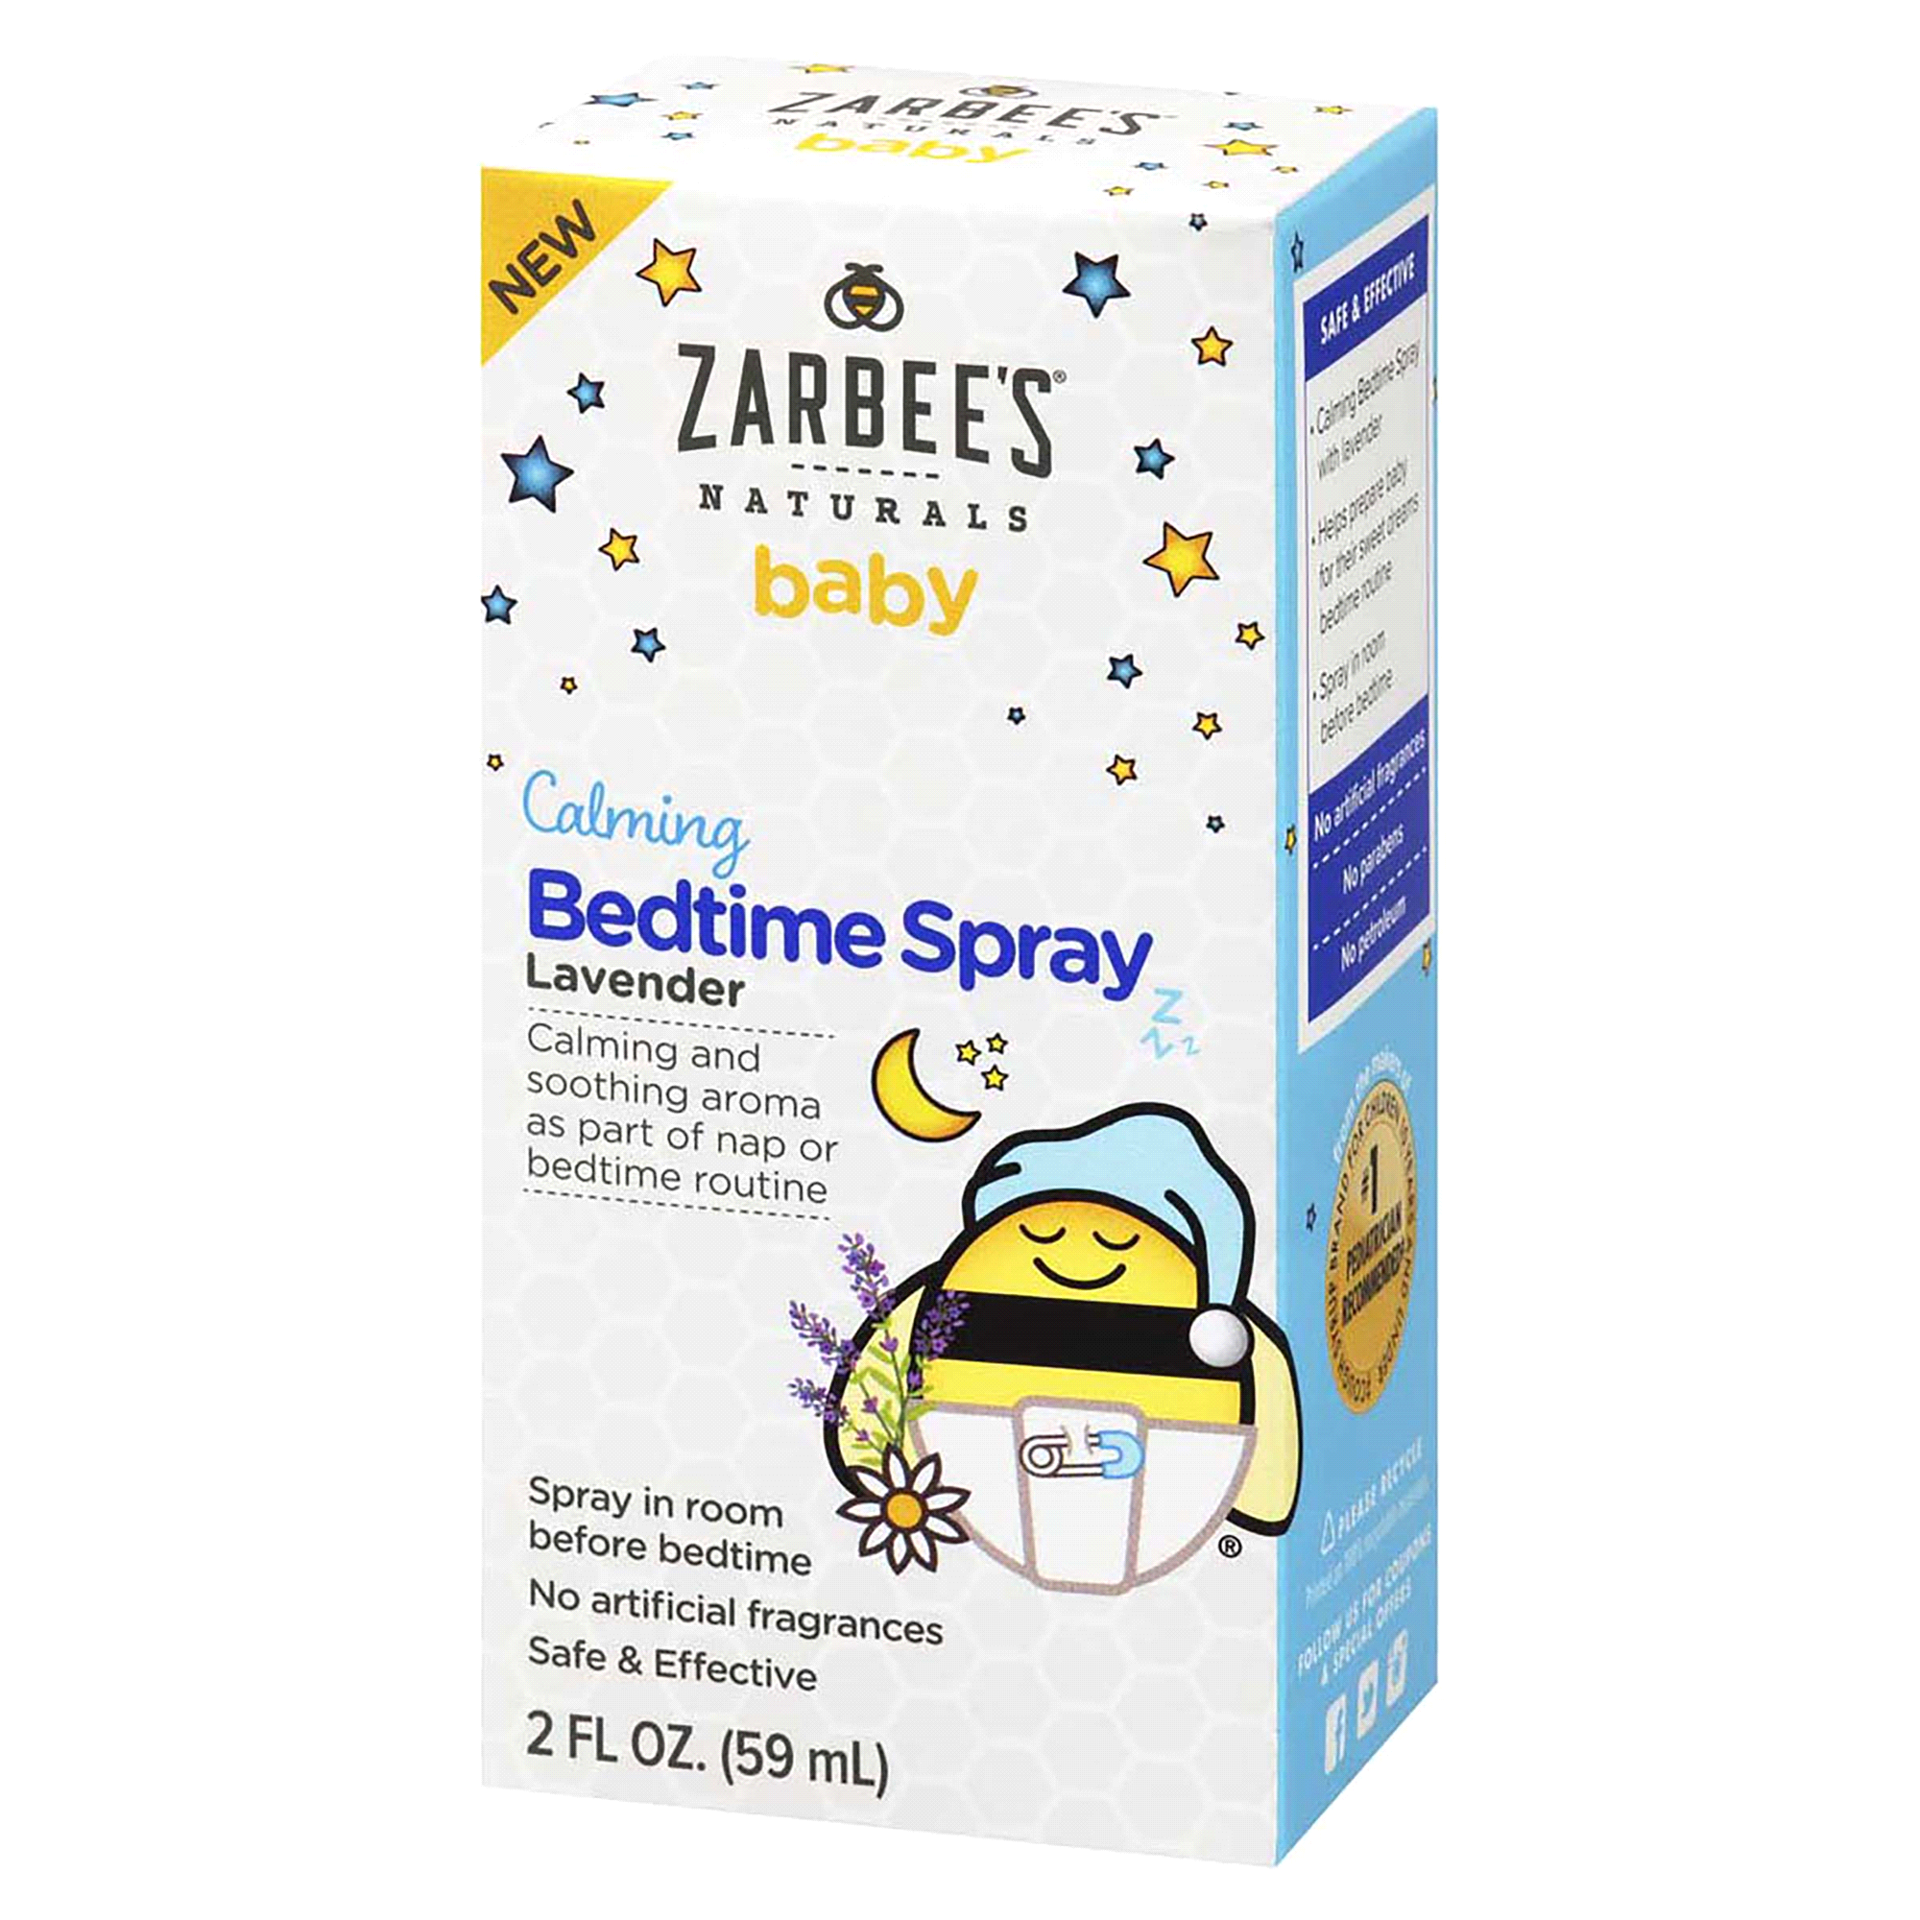 slide 7 of 13, Zarbee's Naturals Baby Sleep Spray, Calming Bedtime Spray with Natural Lavender and Chamomile to Help Infant
Nighttime Routine, 2oz Bottle, 2 fl oz